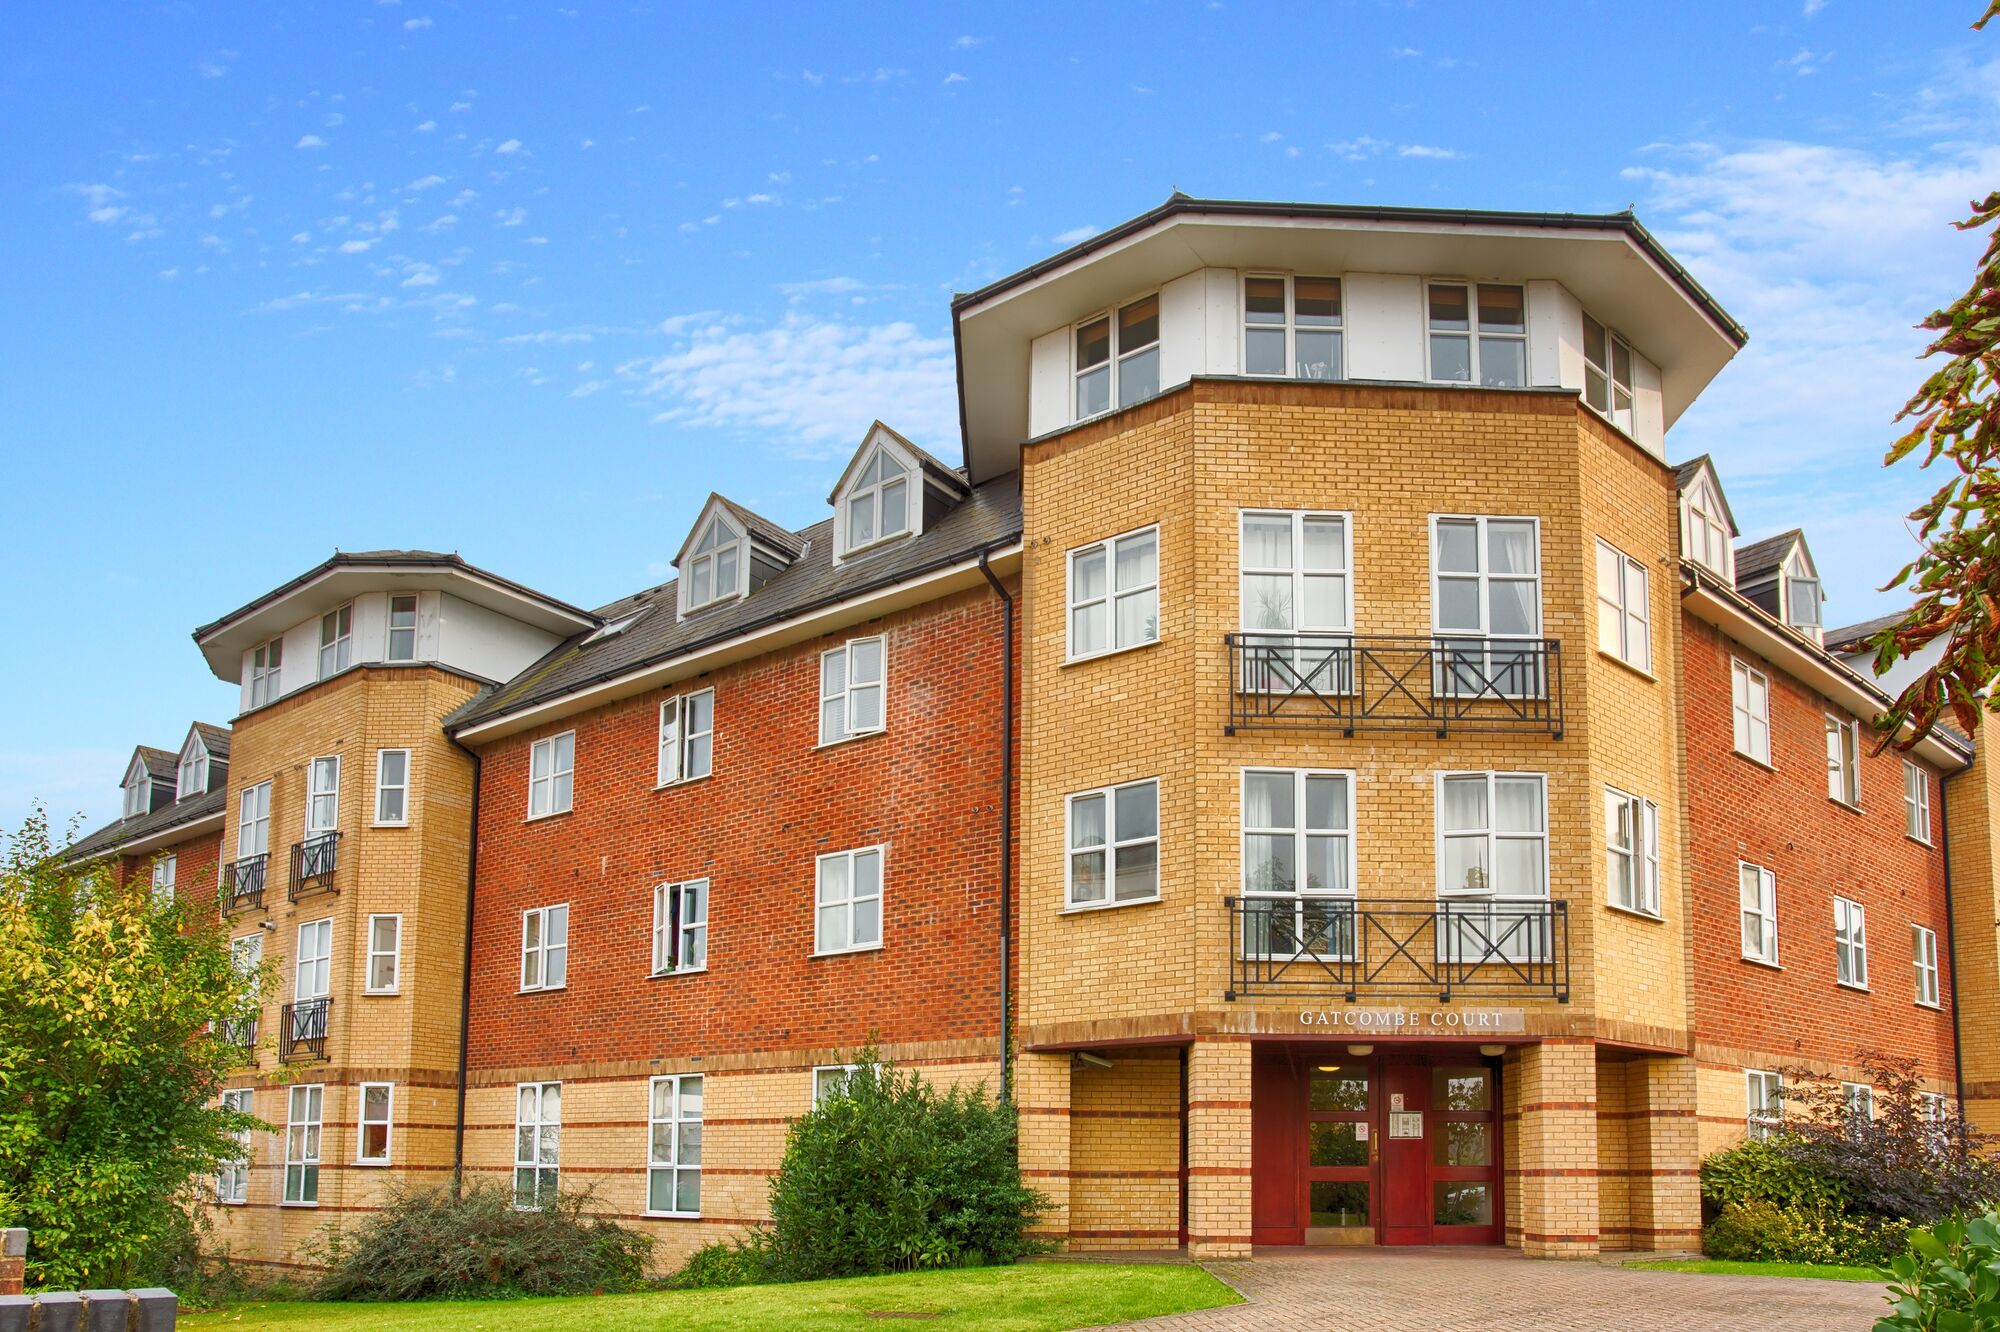 2 bedroom  flat to rent, Available from 04/07/2024 Gatcombe Court, Dexter Close, AL1, main image